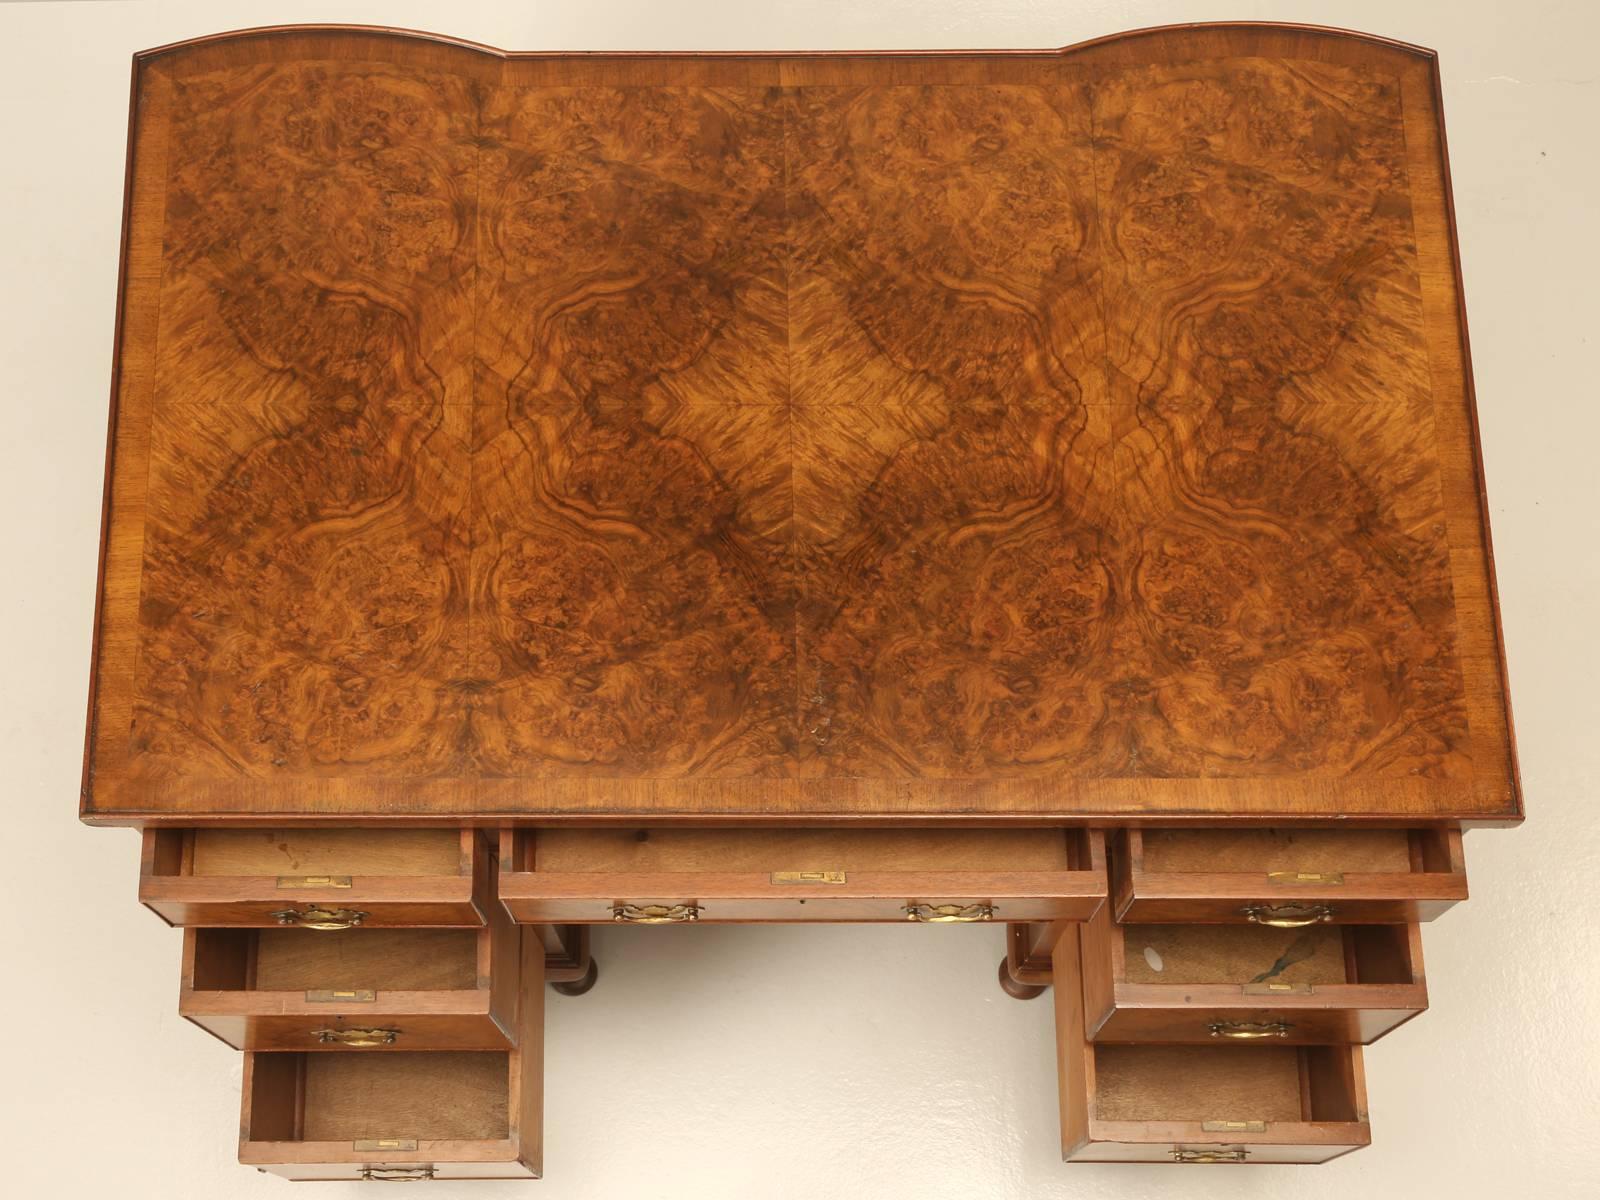 A stunning antique English Edwardian walnut partner's desk, circa 1910.
This charming desk with burl walnut veneered top and drawer facings comes with three frieze drawers and four deep drawers for holding files. The cabinet doors to the opposite